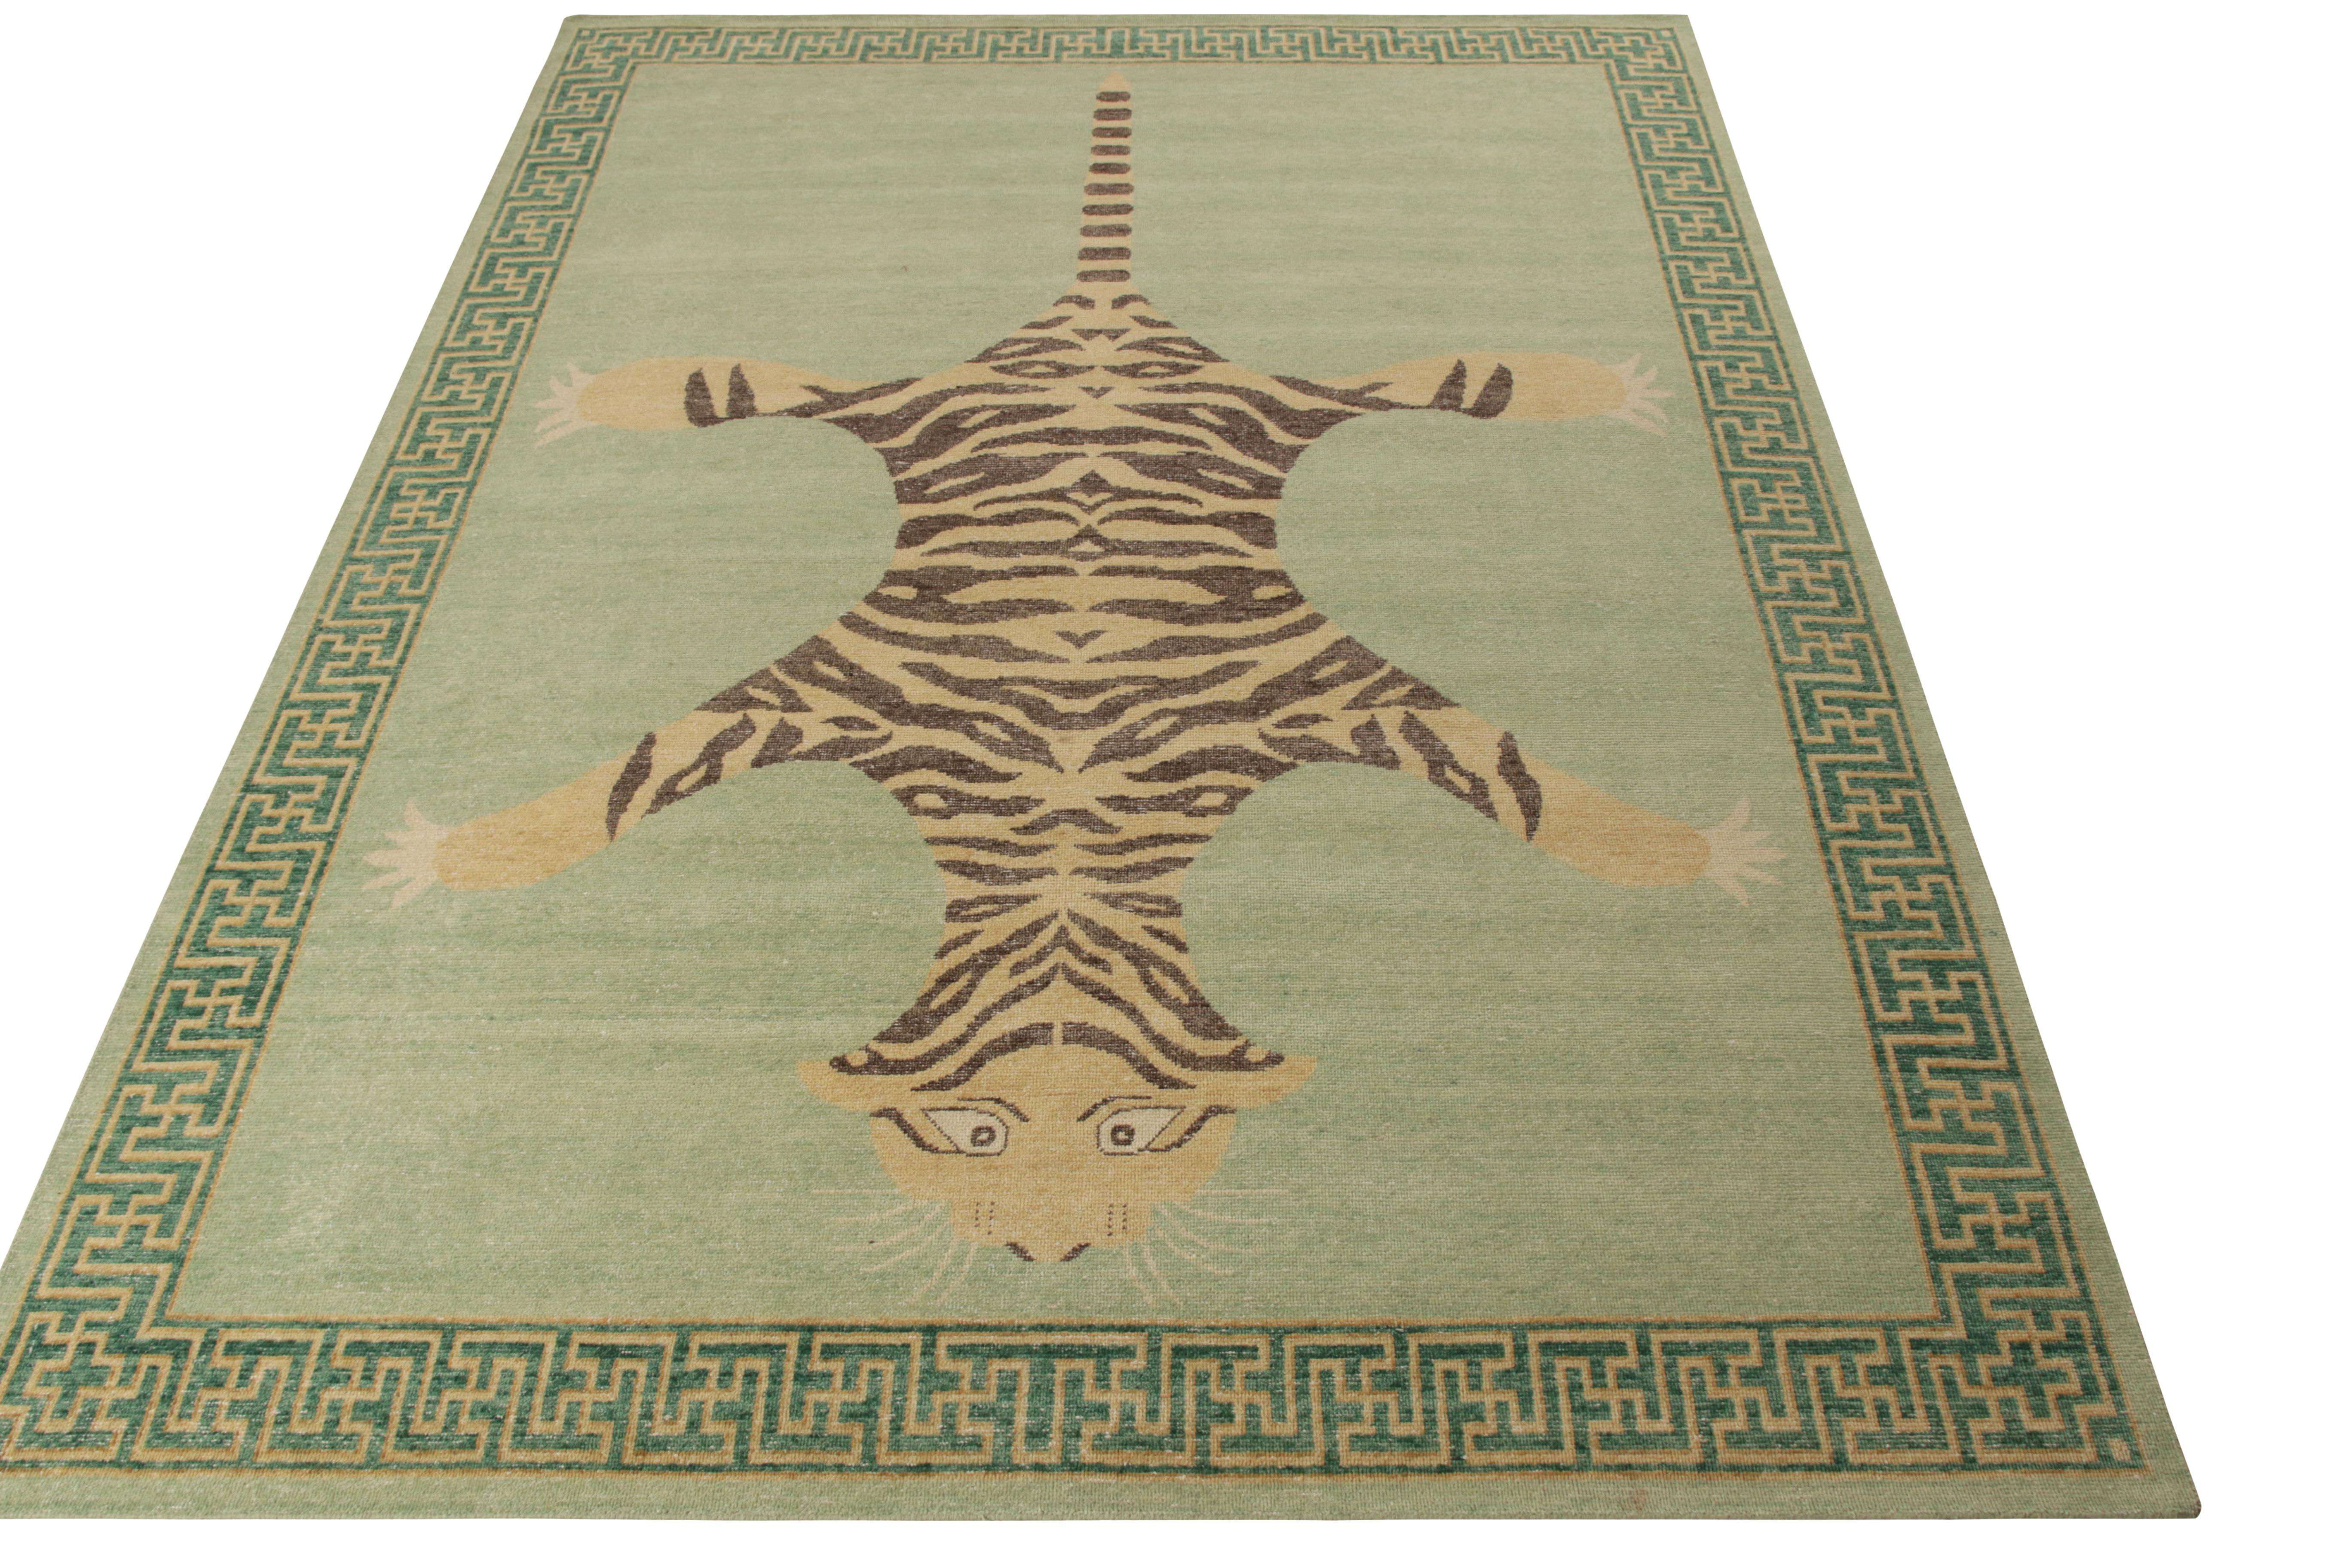 An ode to celebrated classic Indian tiger rug styles, available as a custom rug design from the Homage Collection by Rug & Kilim. Hand knotted in wool, exemplifying this collection’s modern take on distressed style through a comfortable,